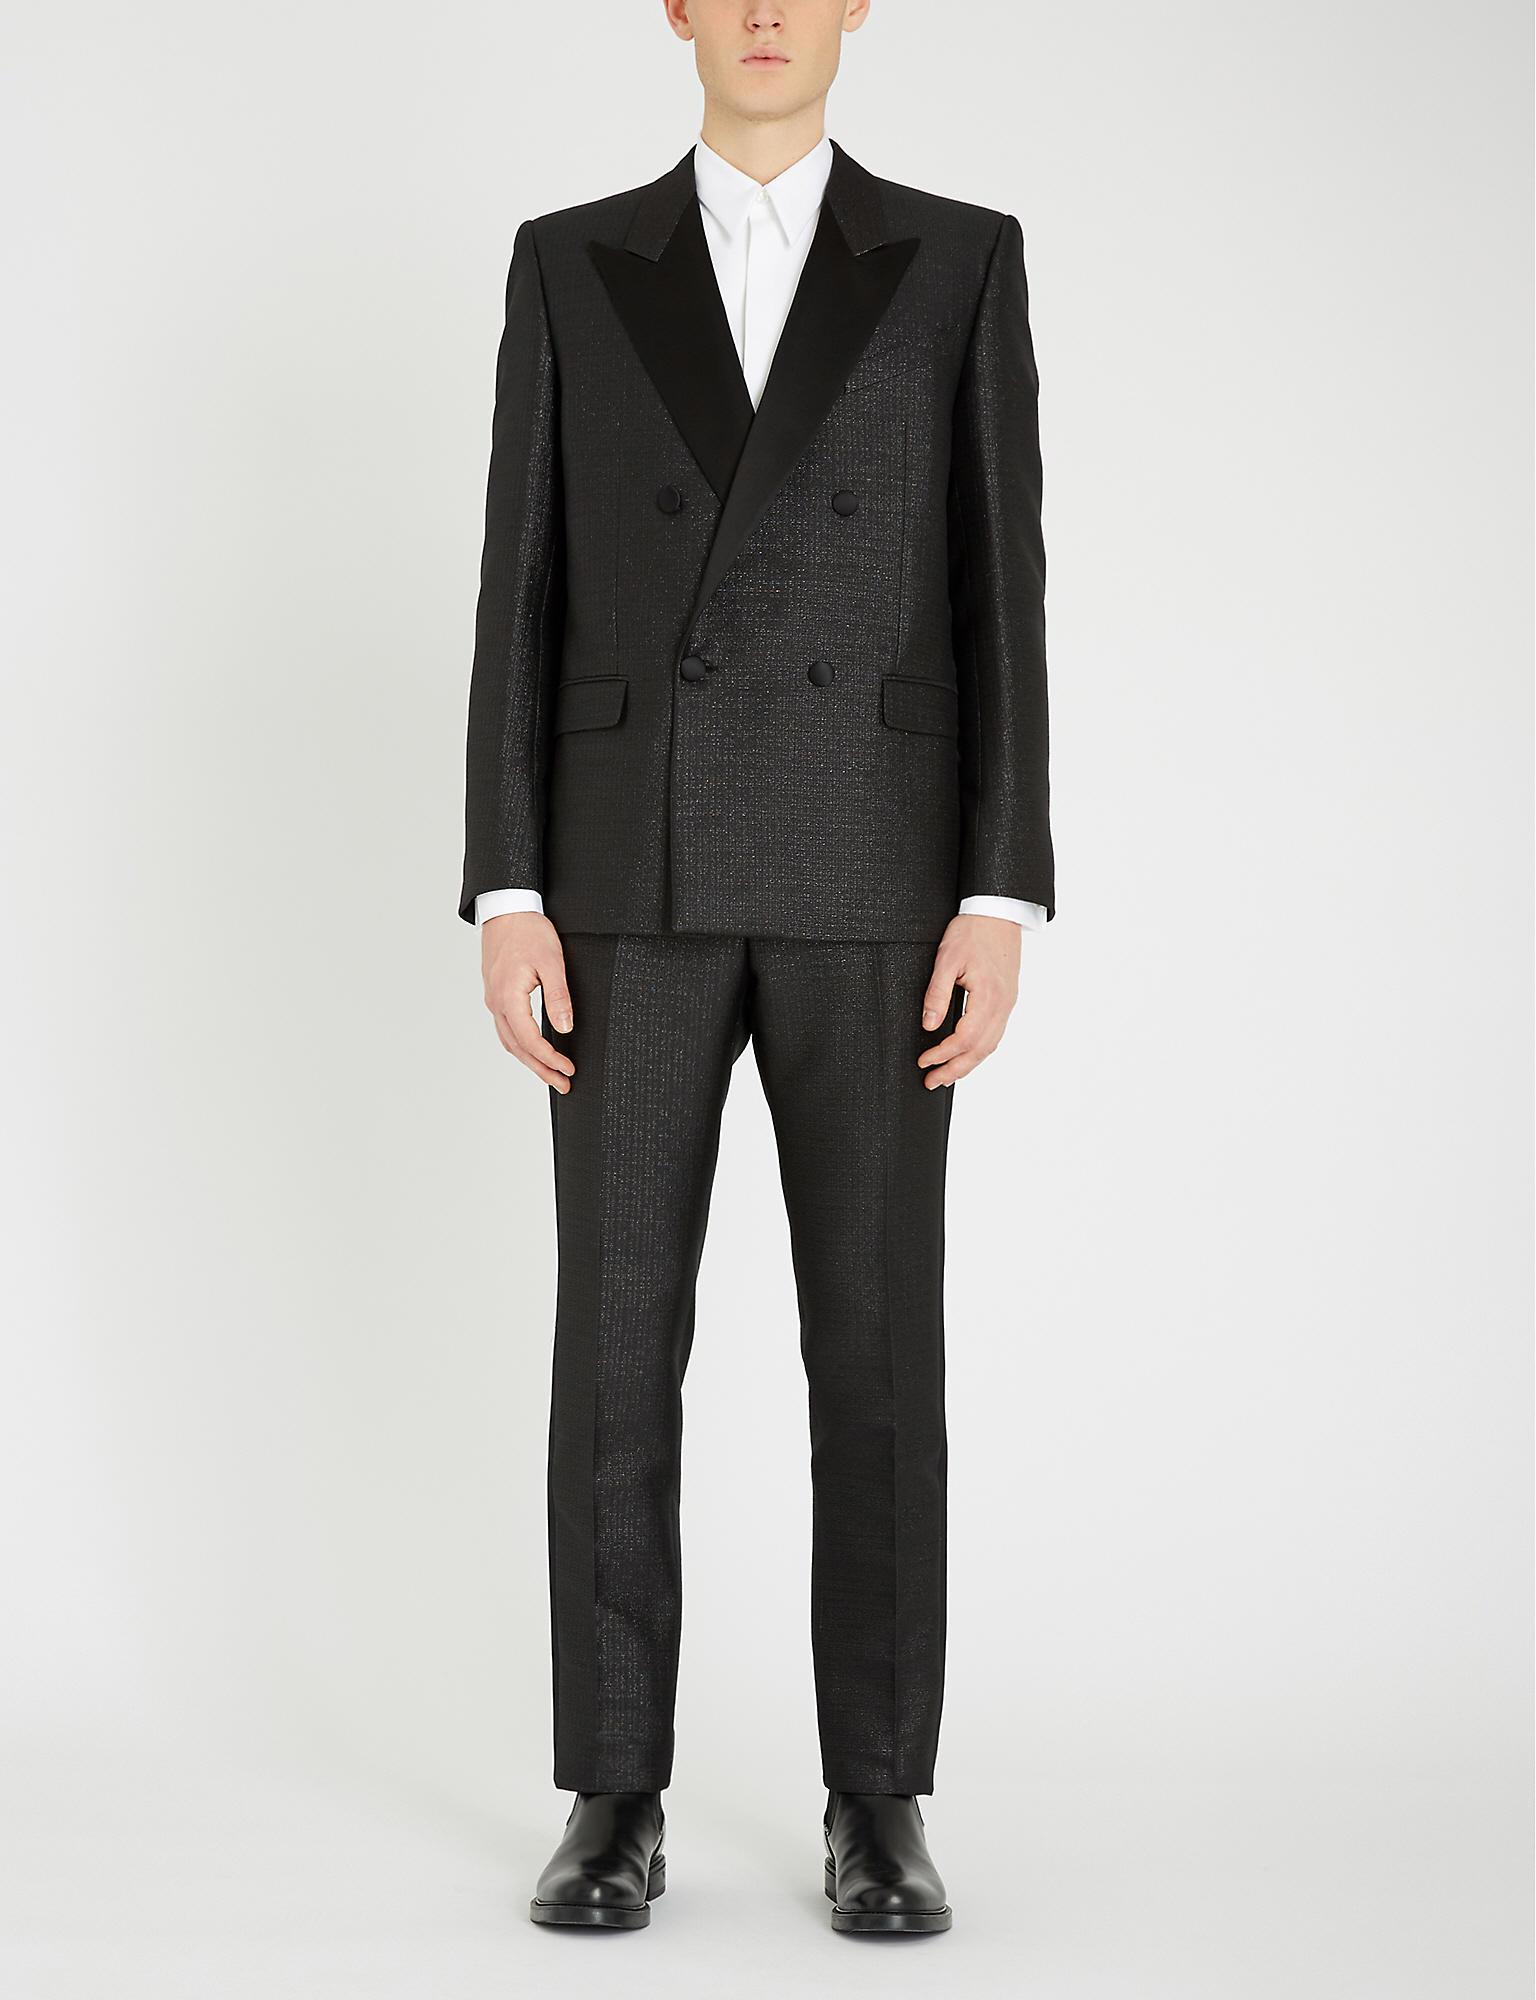 Givenchy Classic Double-breasted Suit in Black for Men | Lyst